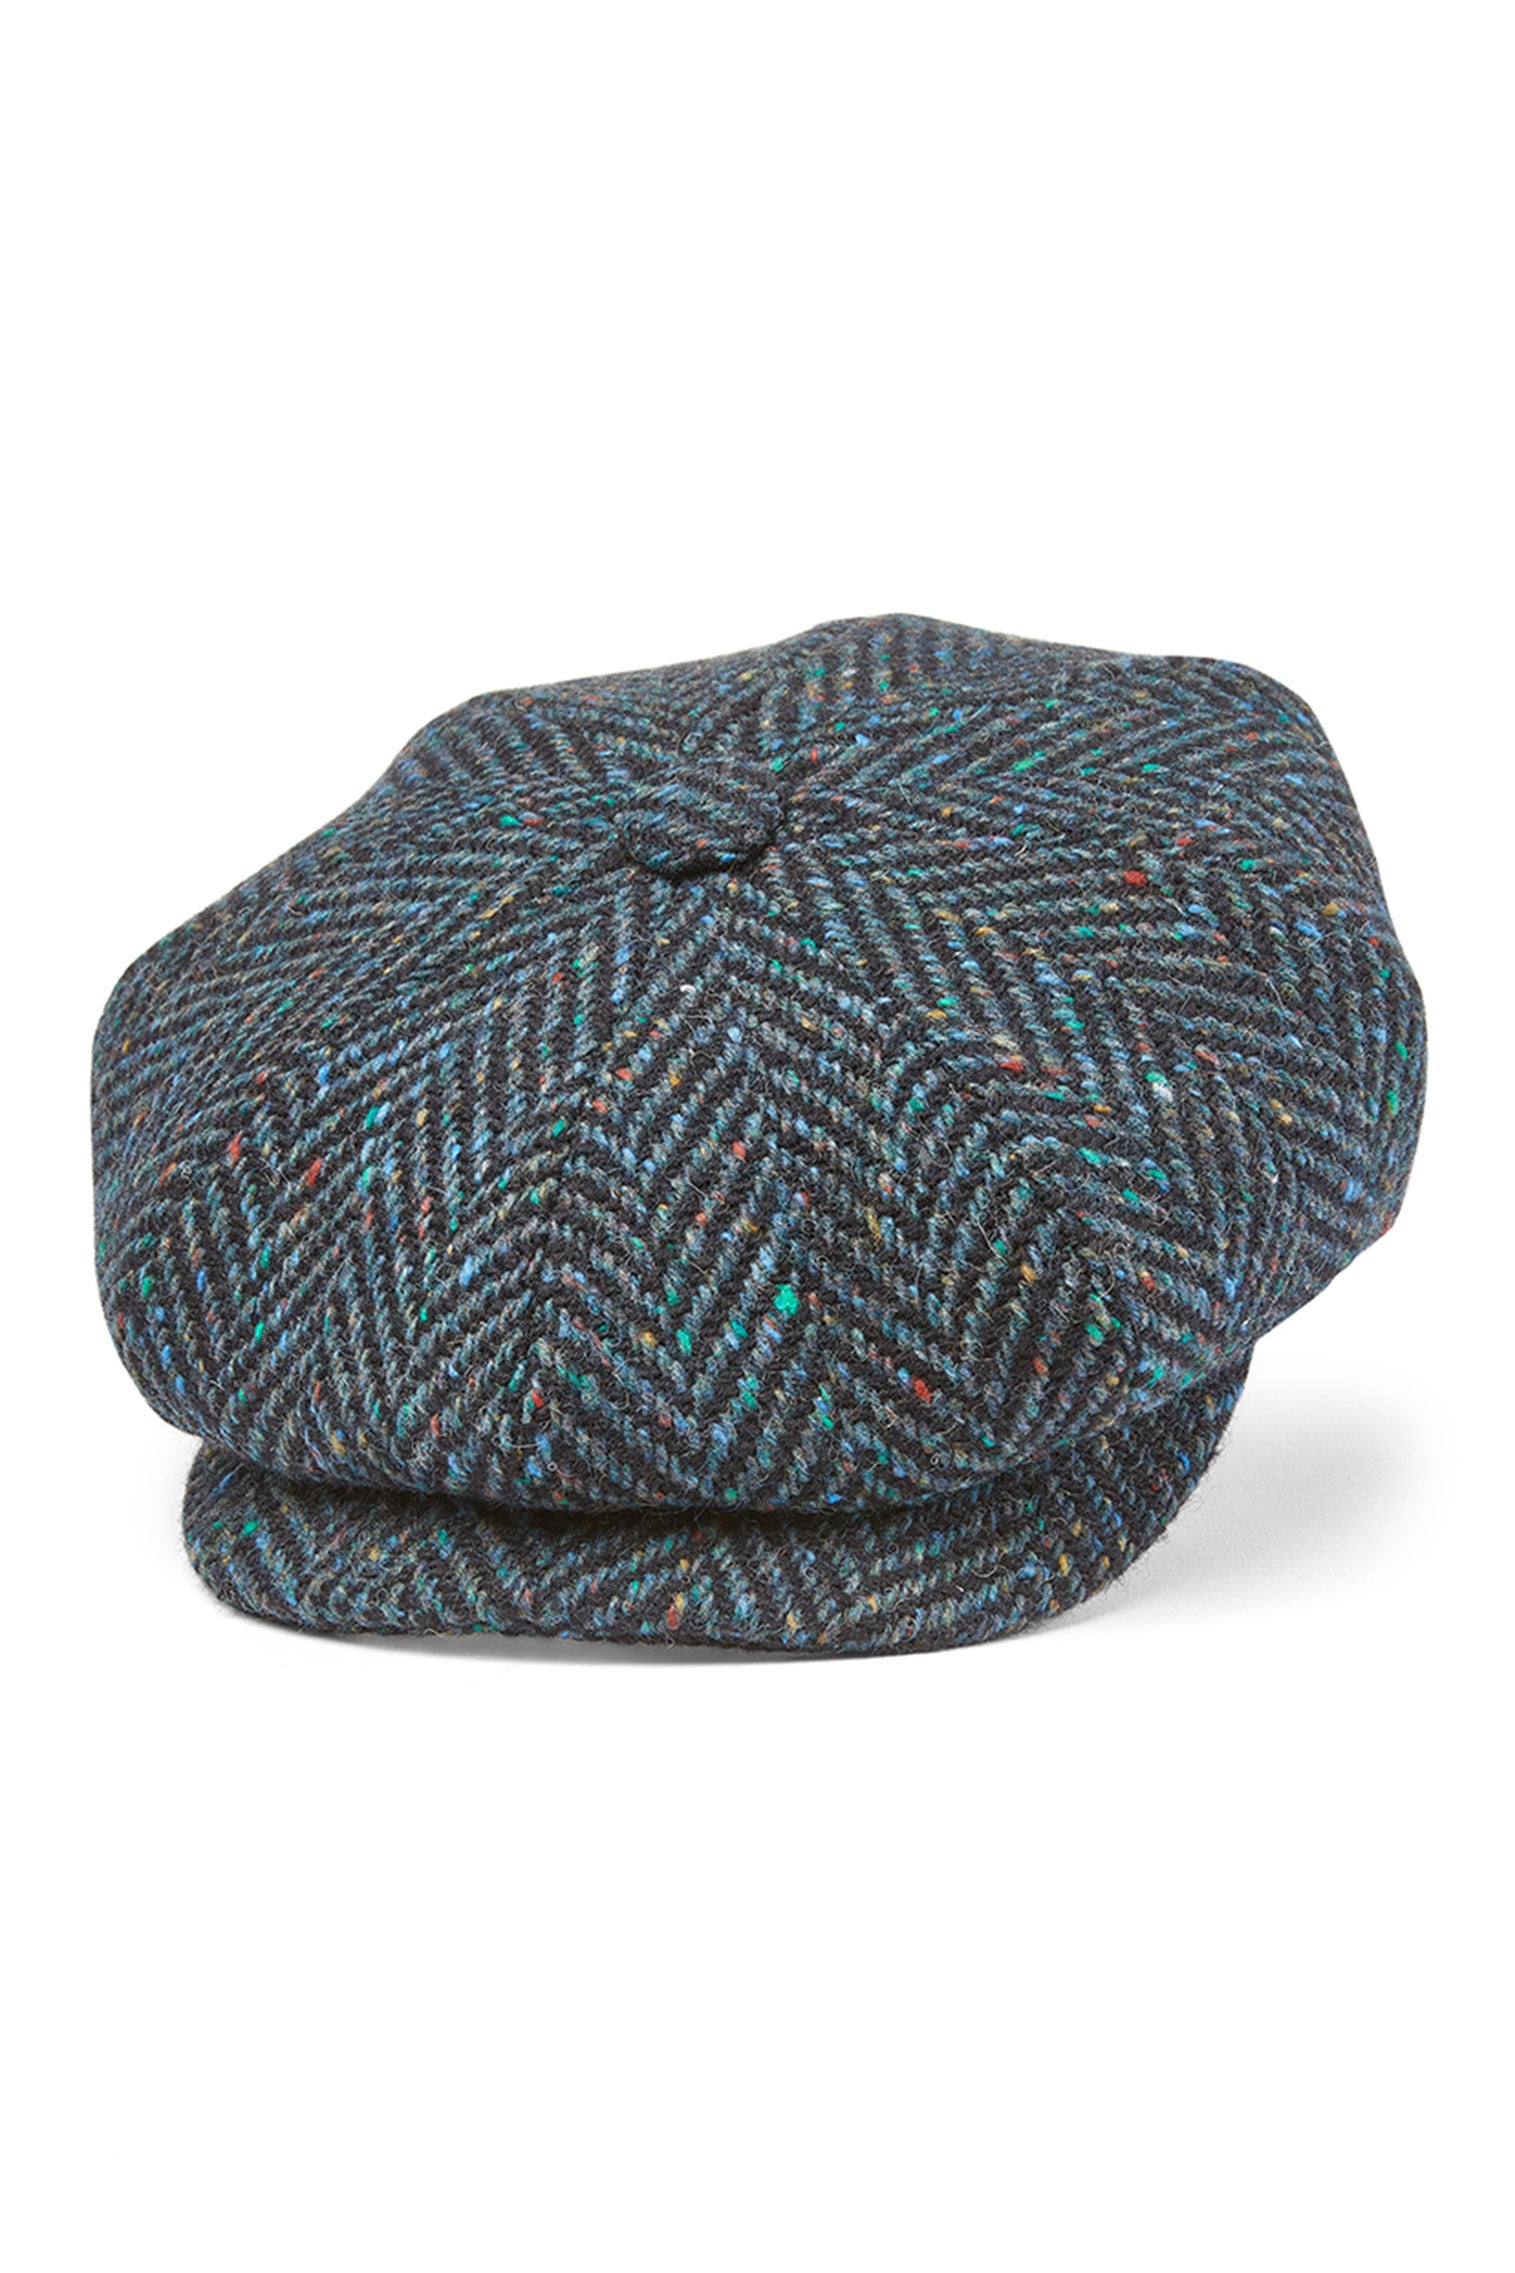 Muirfield Tweed Bakerboy Cap - Hats for Square Face Shapes - Lock & Co. Hatters London UK